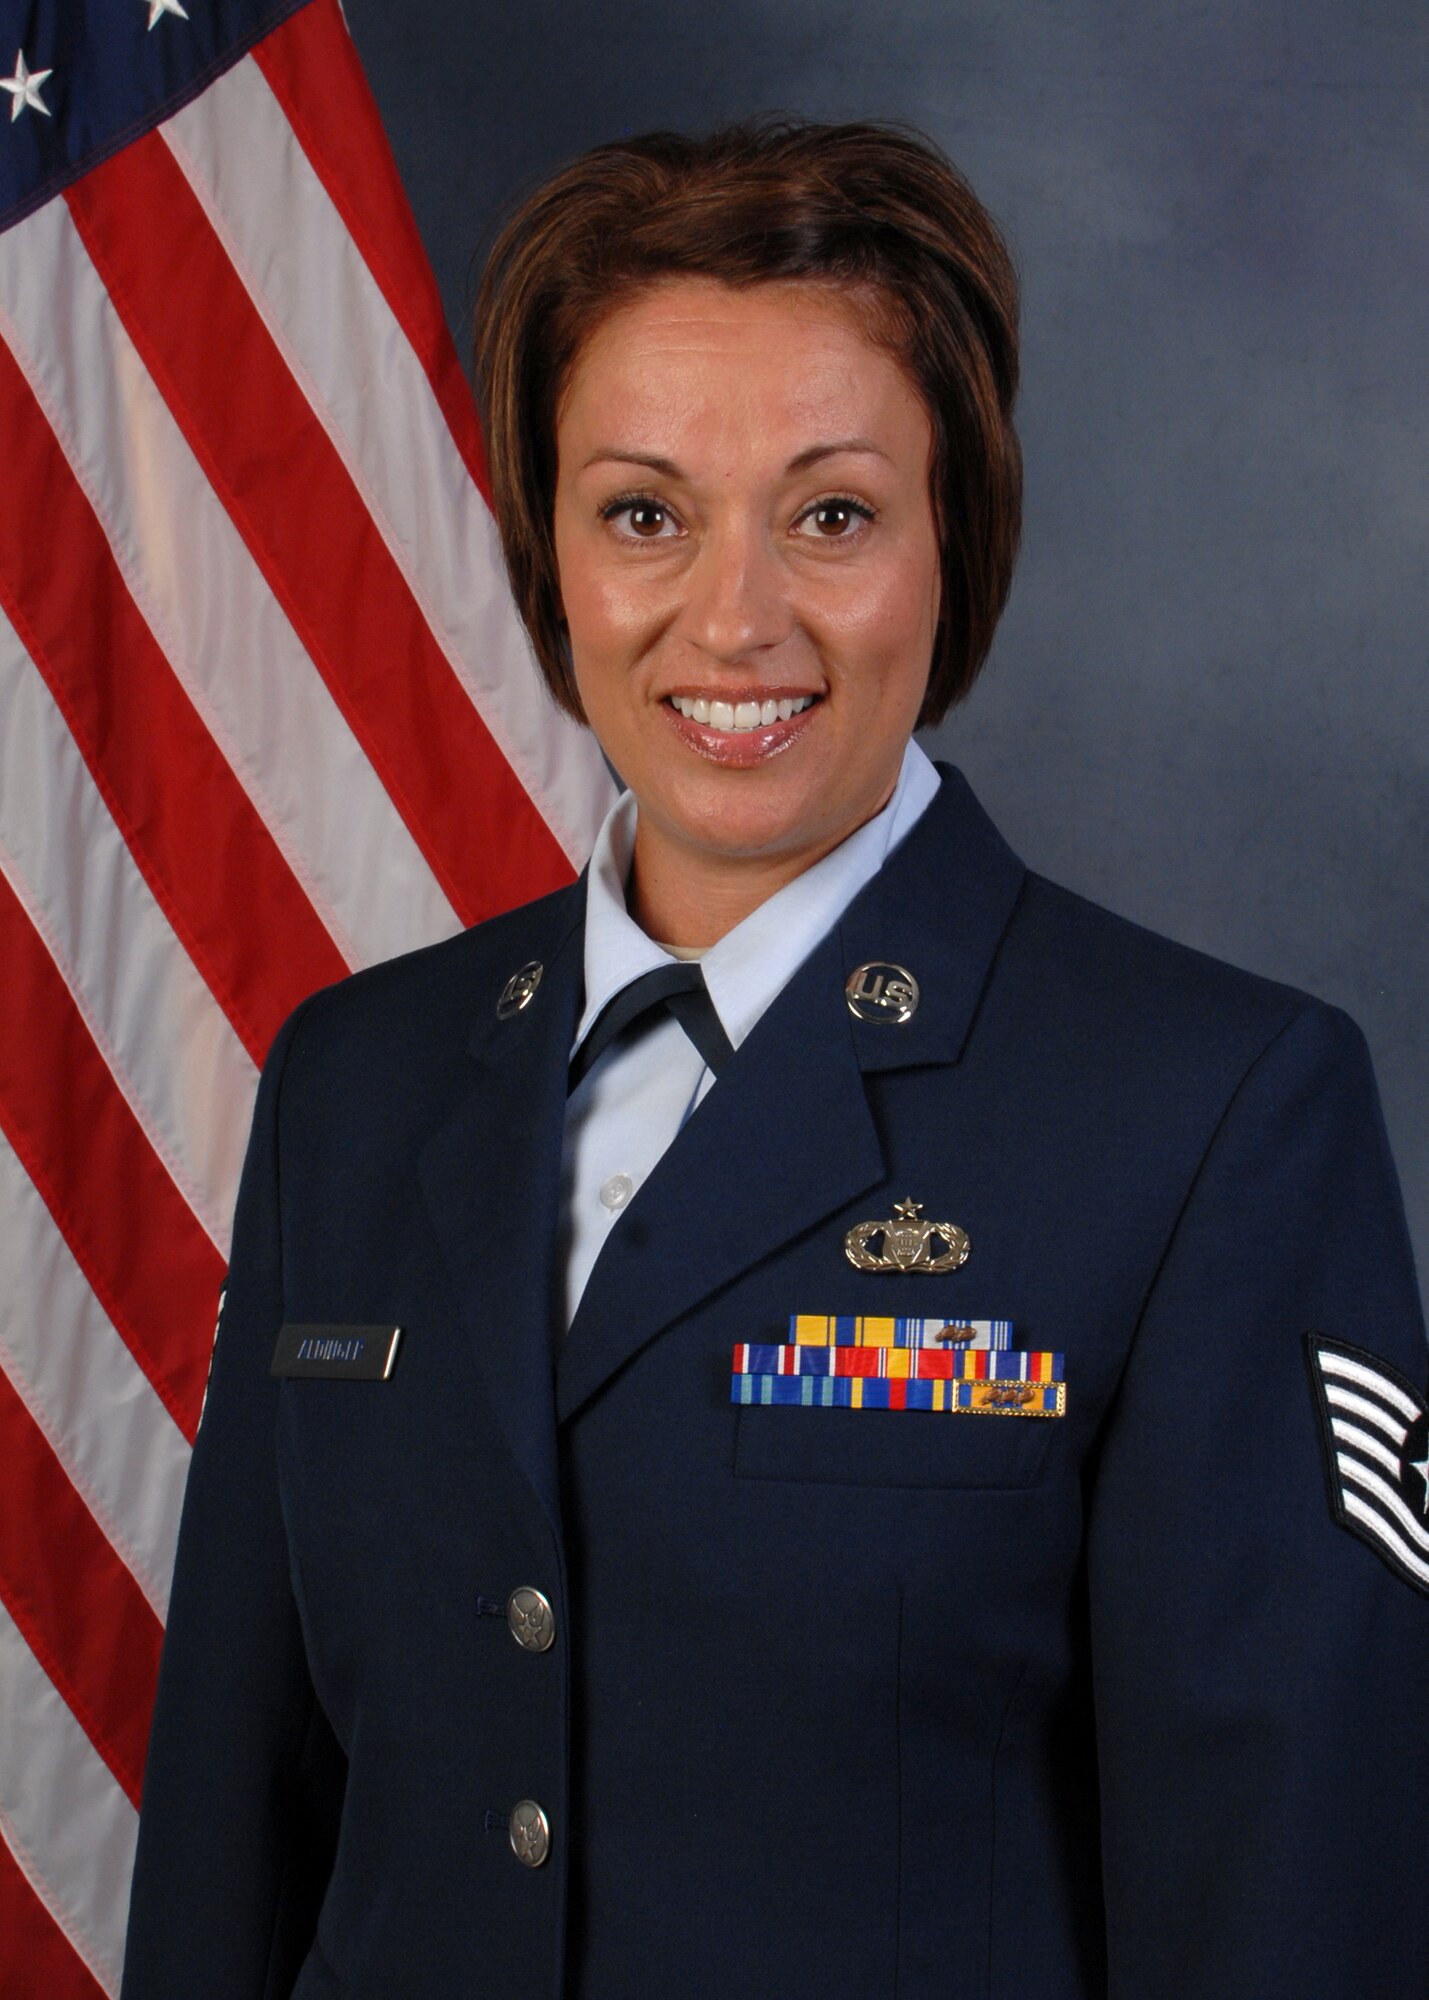 Tech. Sgt. Melissa Aldinger, 173rd Operations Support Flight, was selected as the 2013 Airman of the Year Category II for the 173rd Fighter Wing.  (U.S. Air National Guard photo by Tech. Sgt. Jefferson Thompson, released)